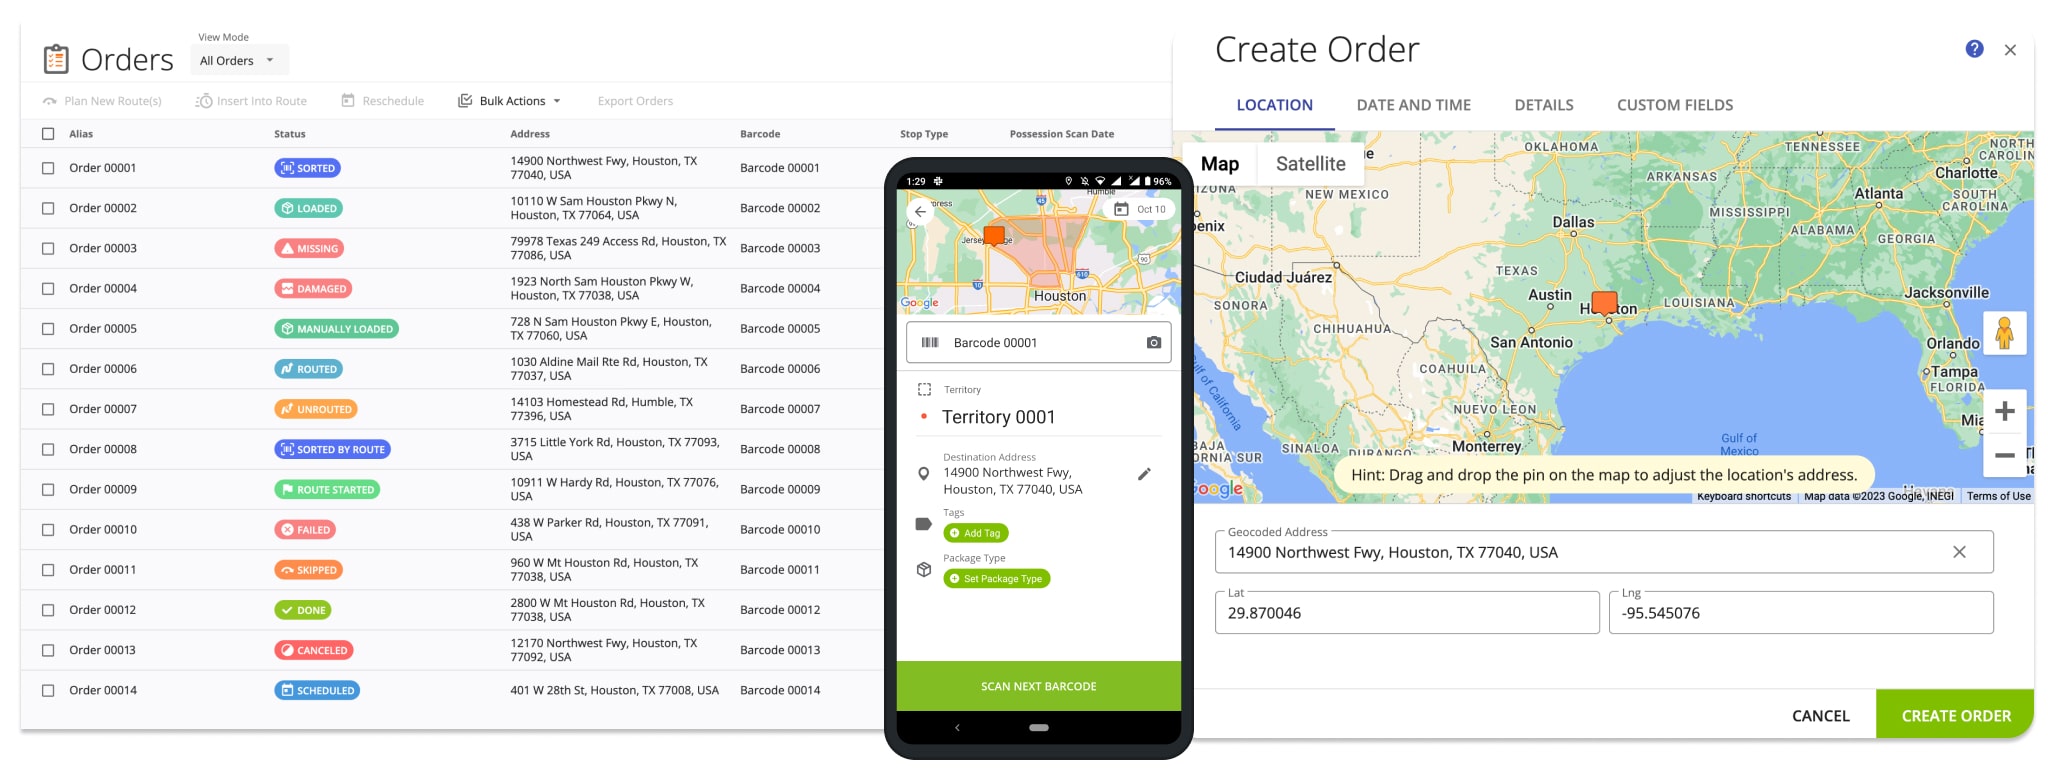 Using Route4Me's Delivery Management System Orders List to manage orders and plan order routes.